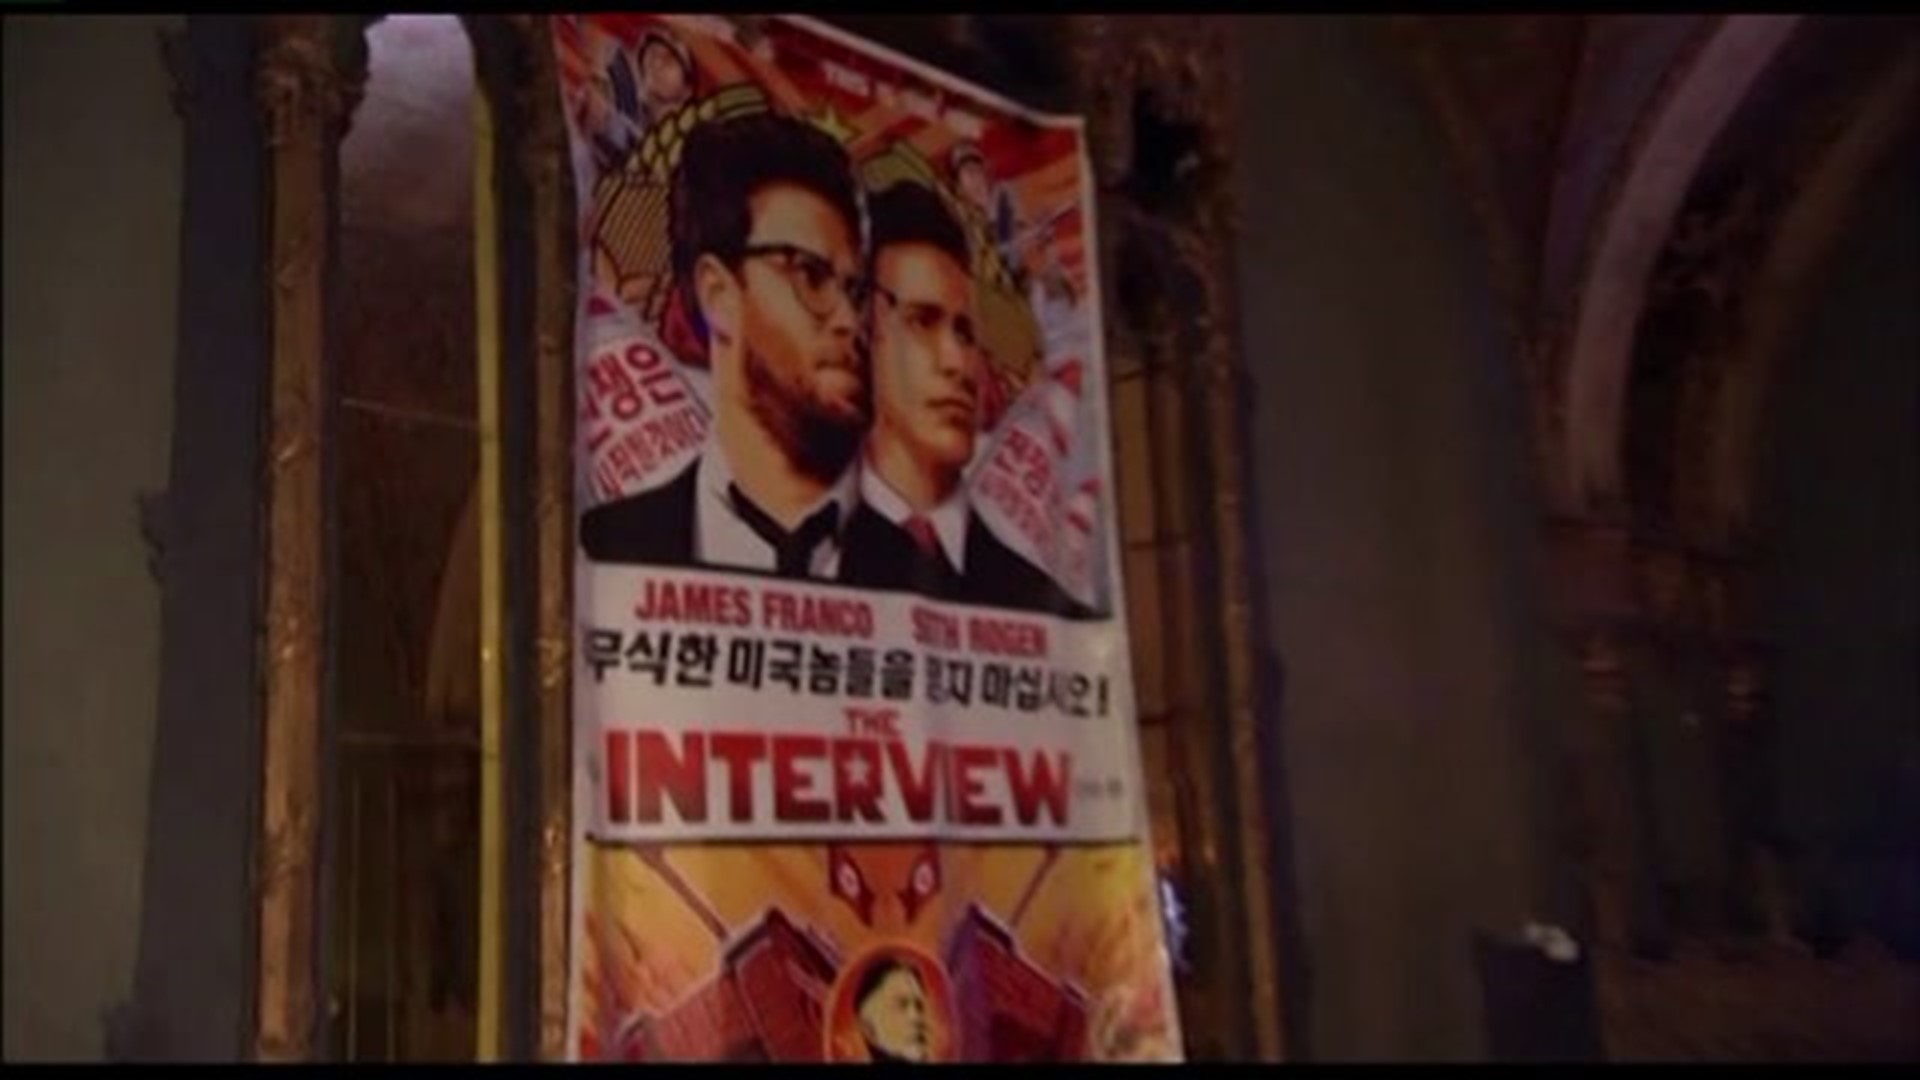 Local movie expert discusses Sony`s decision on "The Interview"